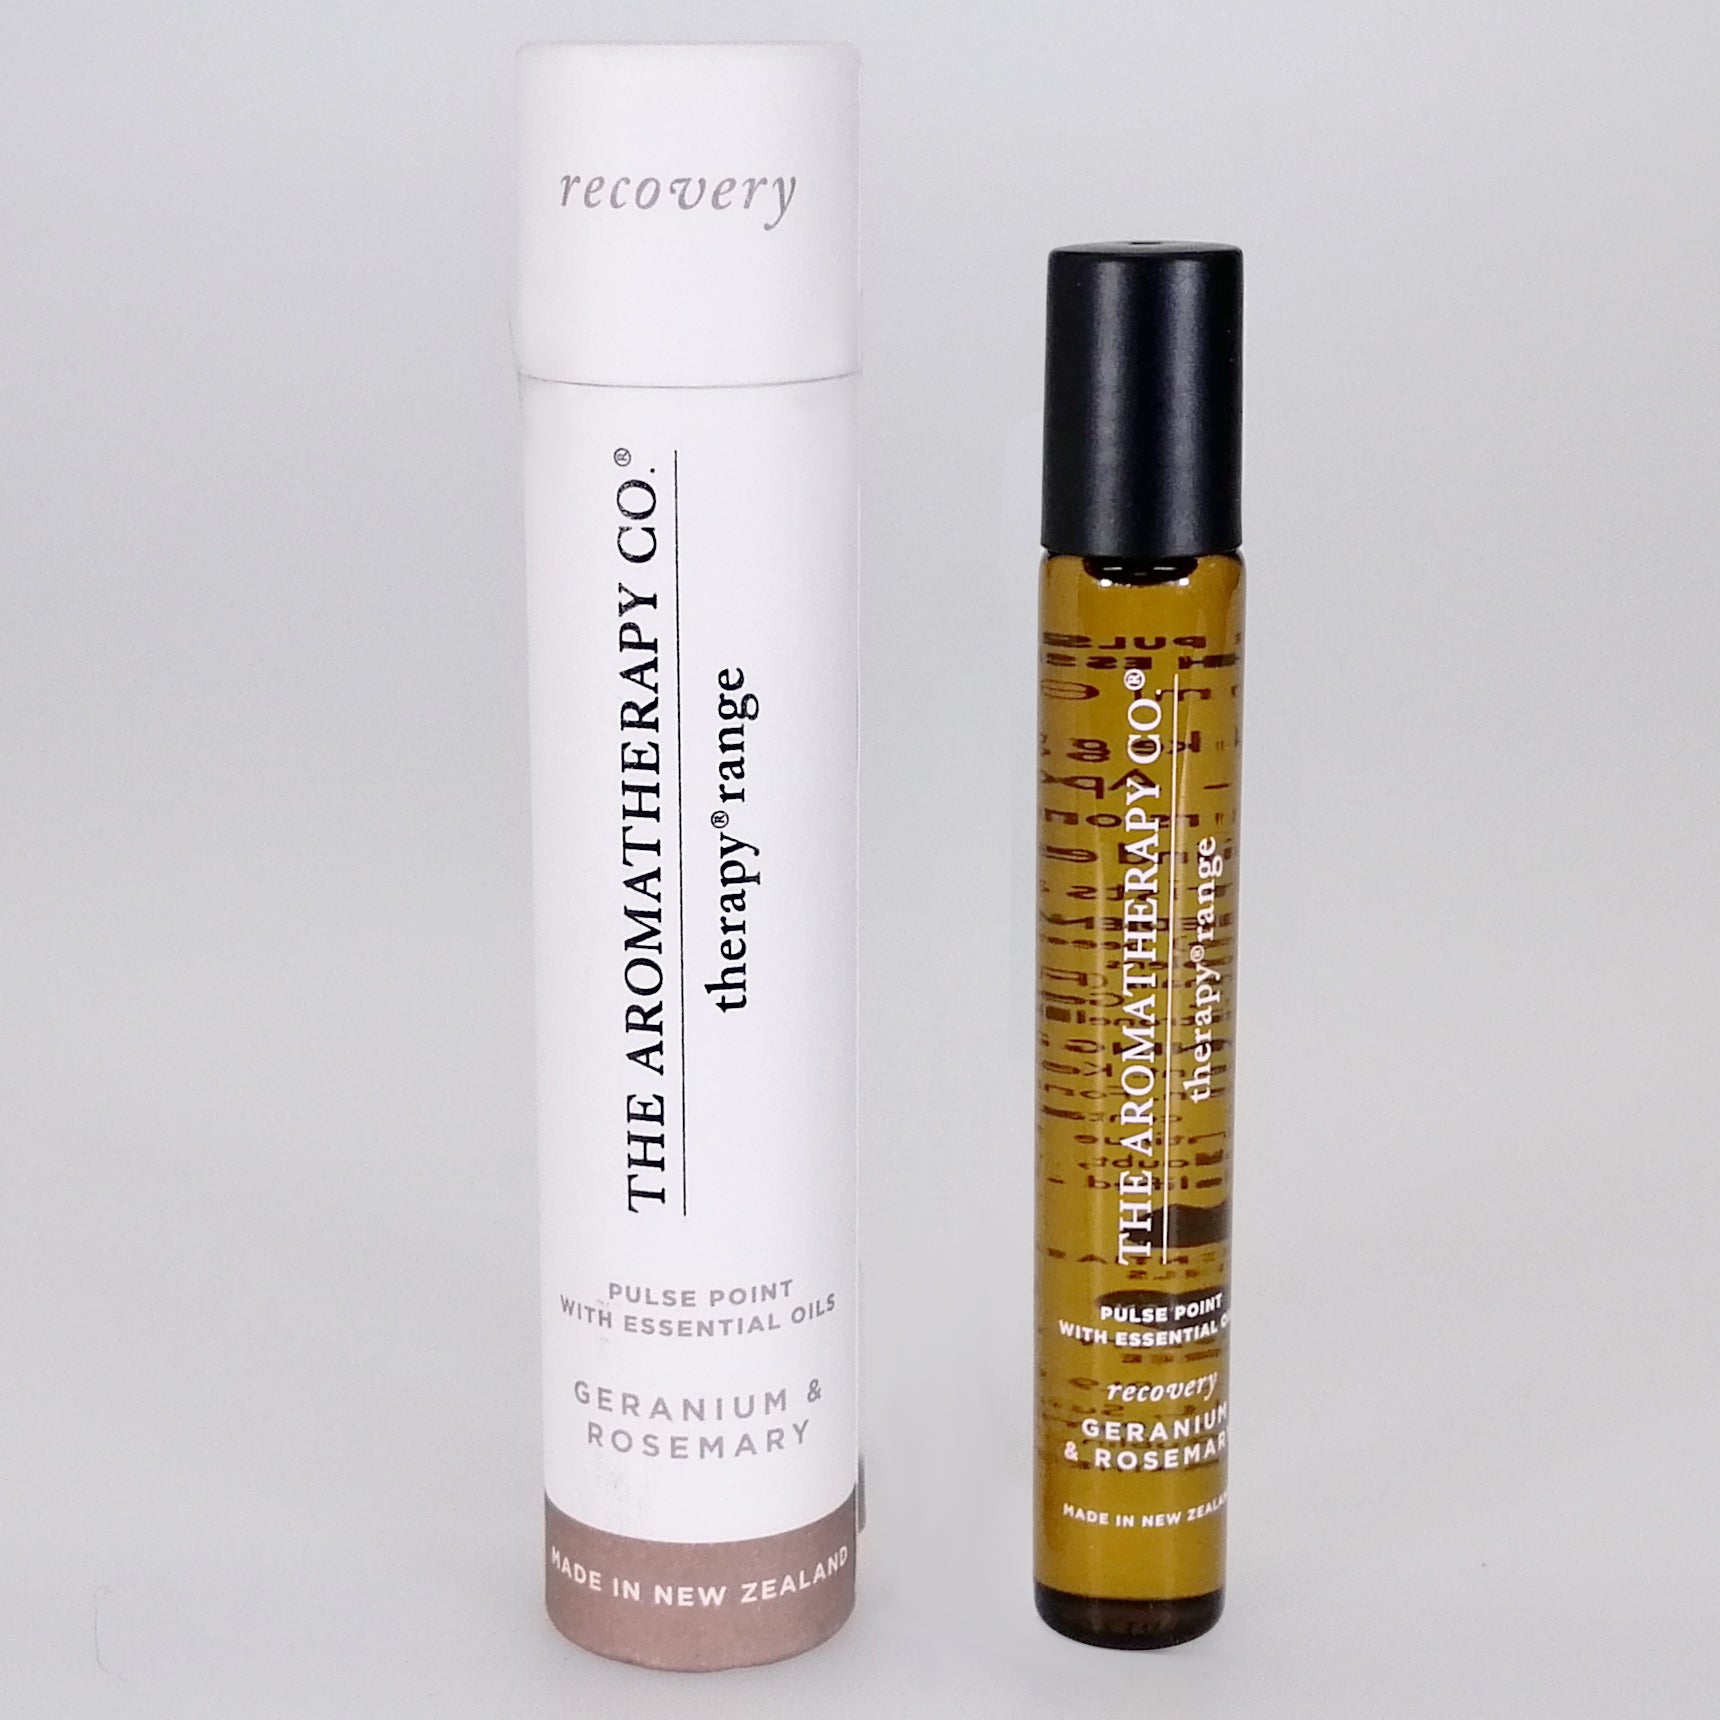 The Aromatherapy Company - Therapy Range 'Recovery' - Pulse Point - Geranium & Rosemary